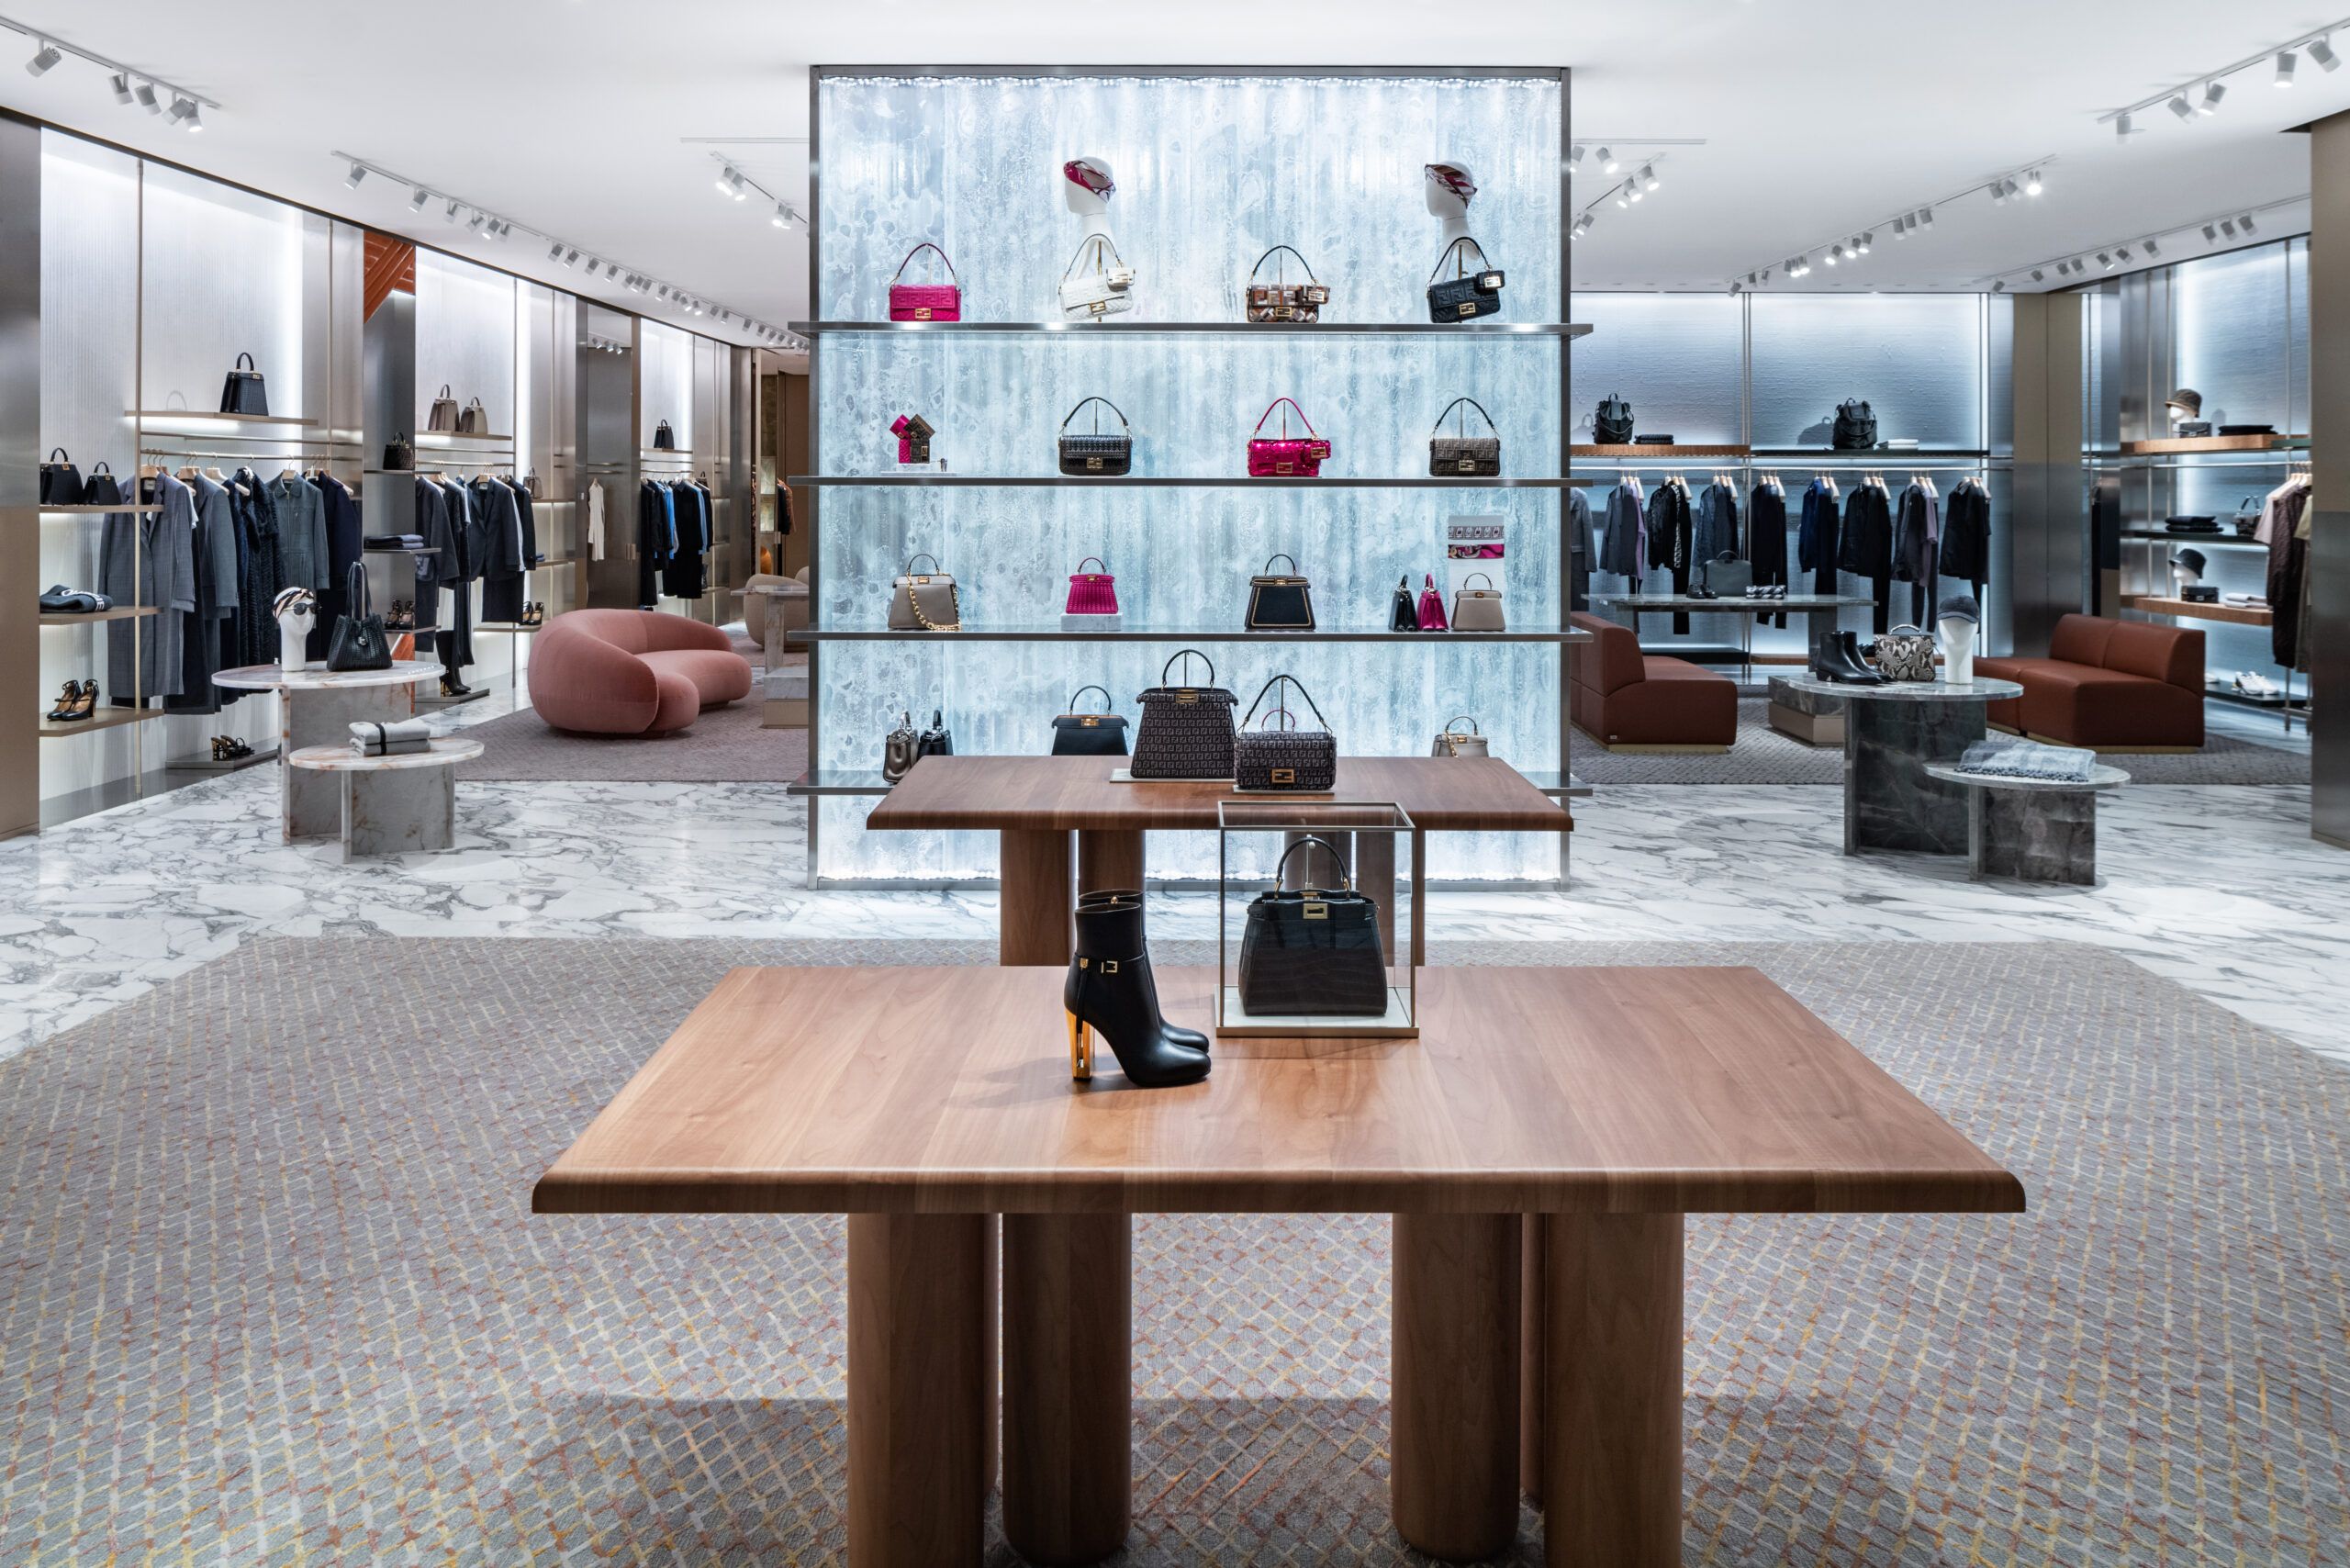 Givenchy opens a new store at Phipps Plaza in Atlanta